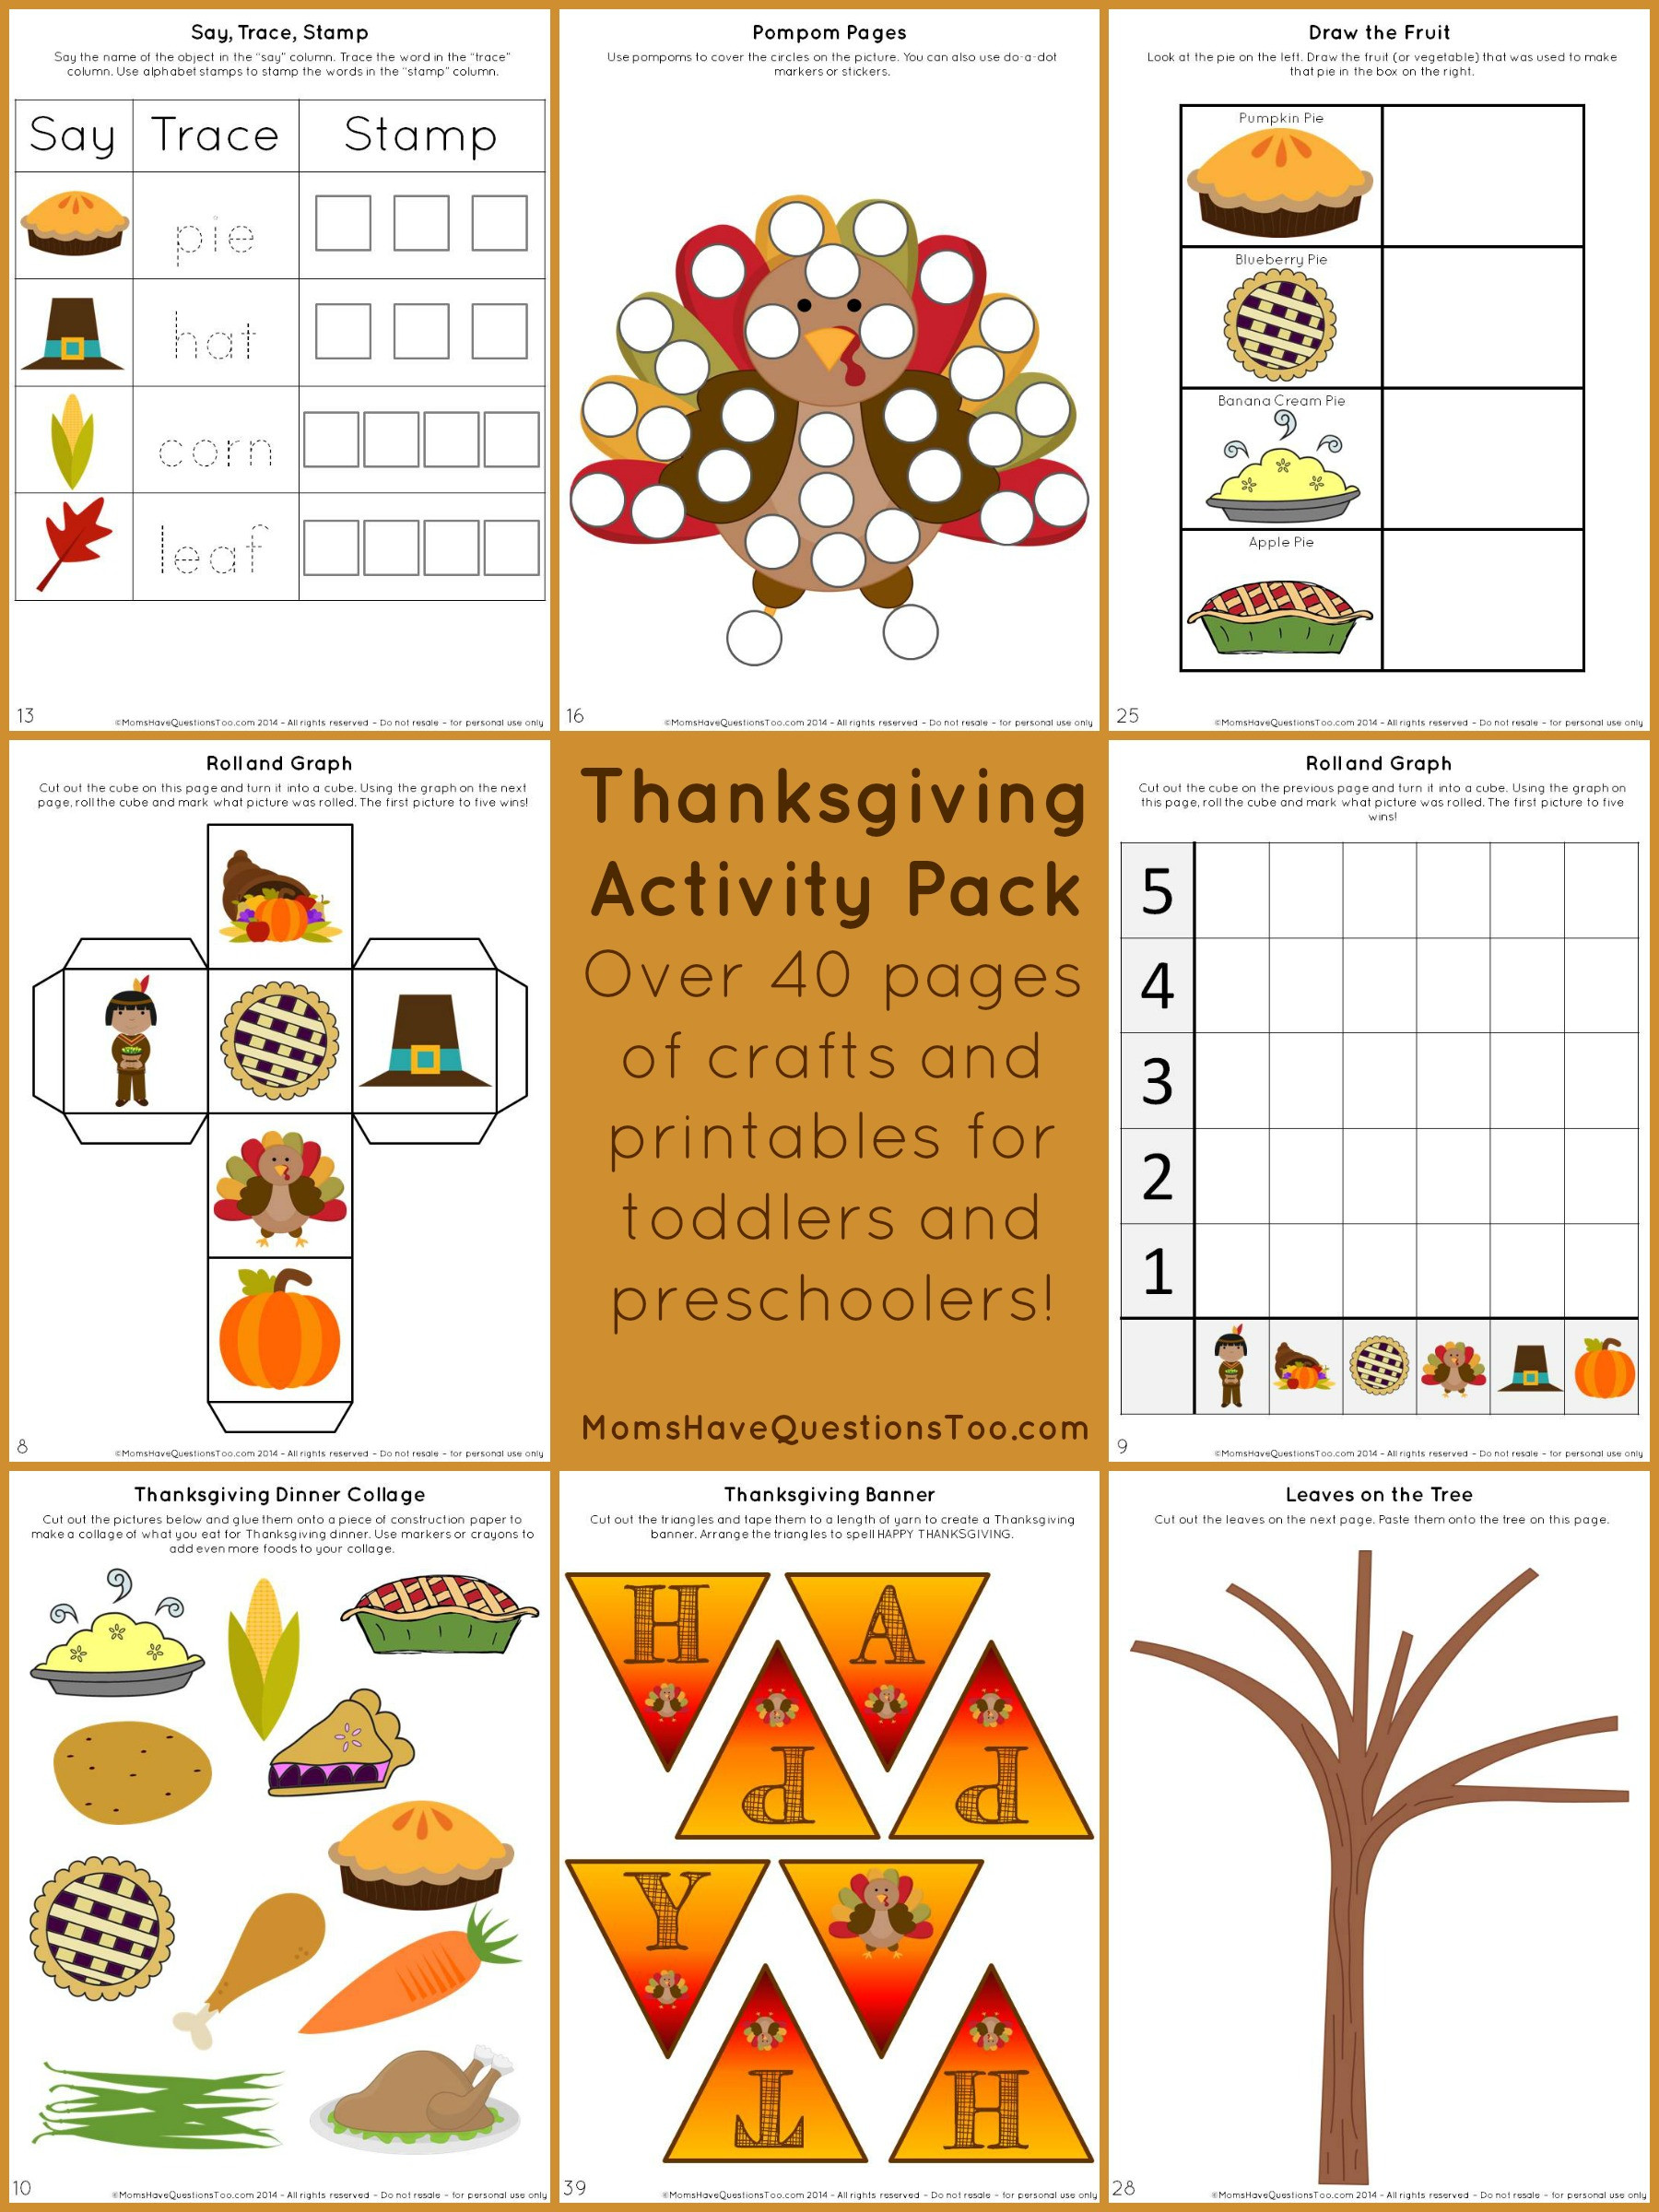 Printable Crafts For Preschoolers
 Thanksgiving Activity Pack with Crafts and Printables